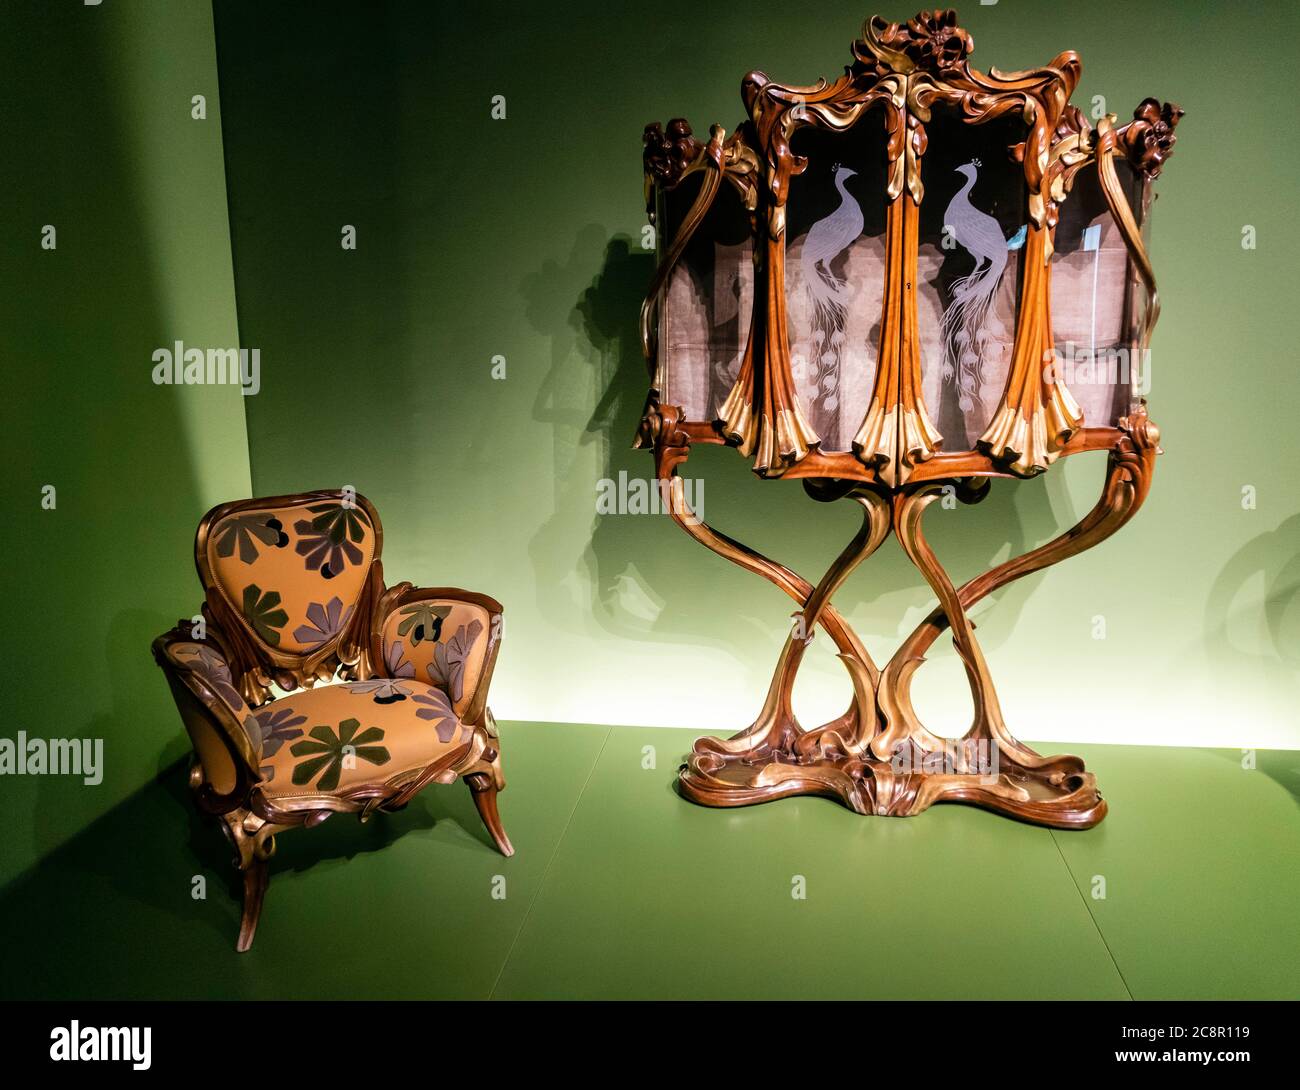 Aleix Clapes (Vilasar de Dalt 1846-Barcelona 1920),modernist furniture (1898-1902),Armchair,Glass showcase,carved and gilded wood,and textiles. Stock Photo